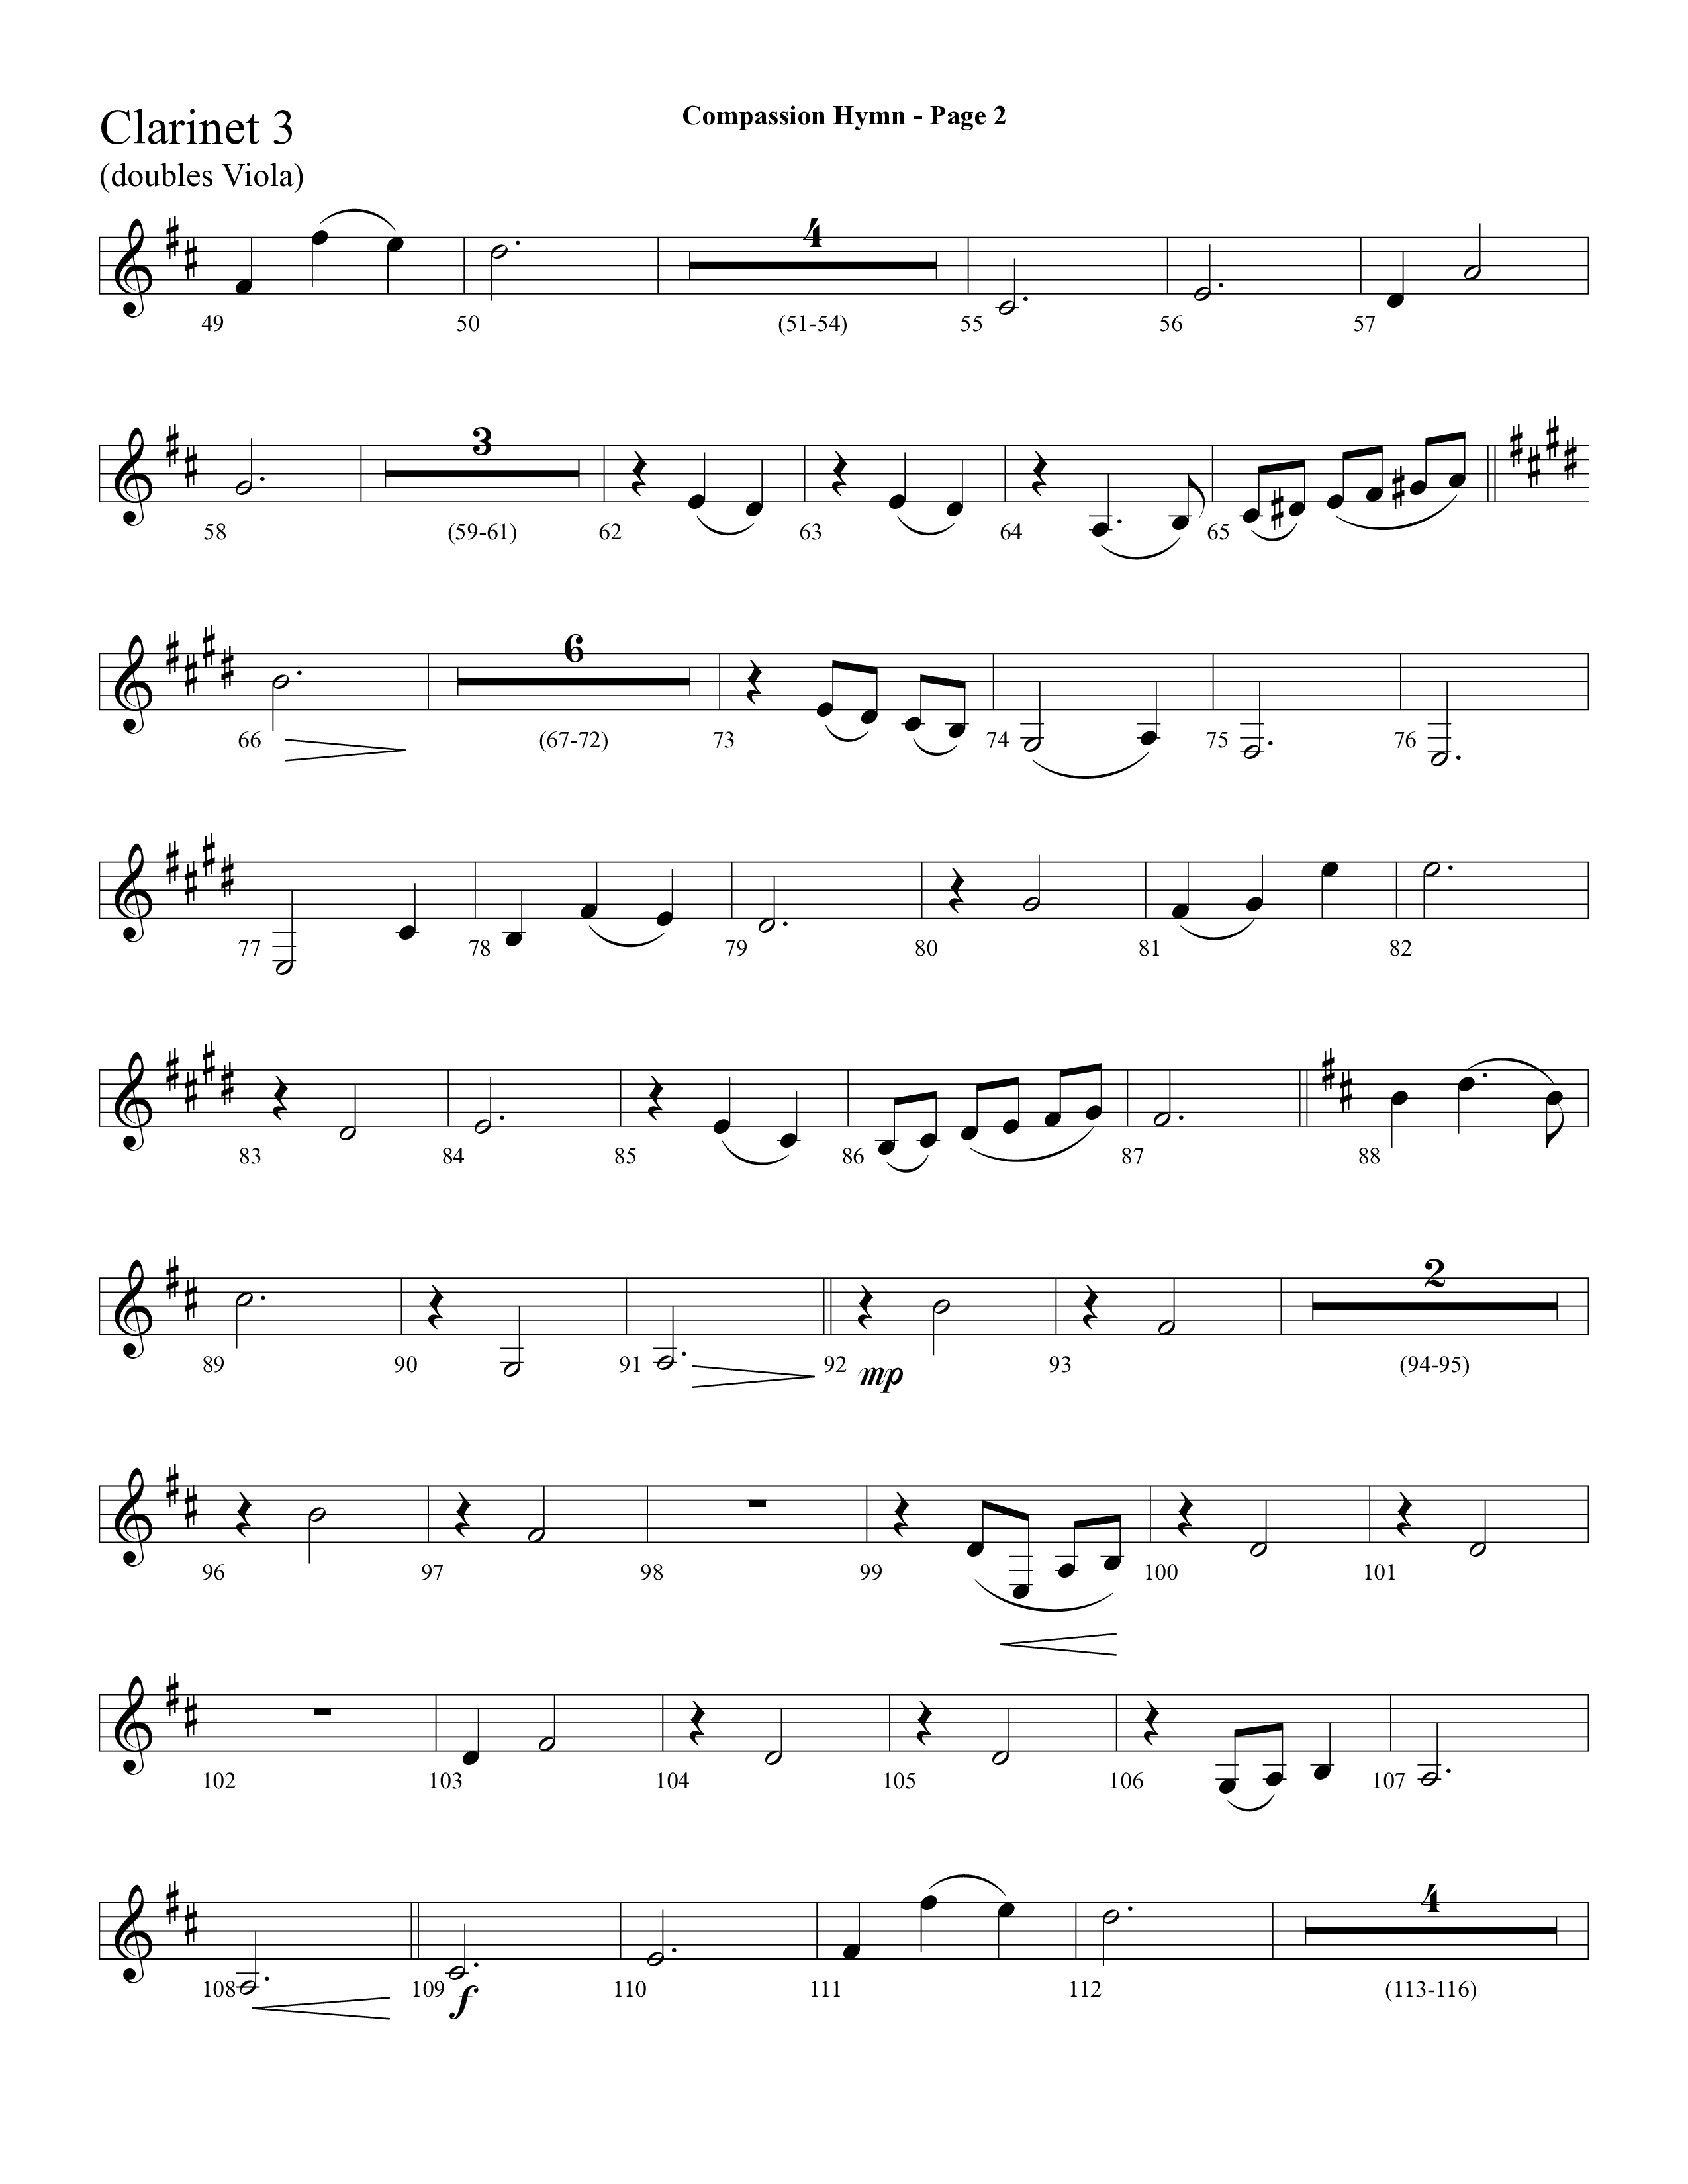 Compassion Hymn (with And Can It Be) (Choral Anthem SATB) Clarinet 3 (Lifeway Choral / Arr. Dave Williamson)